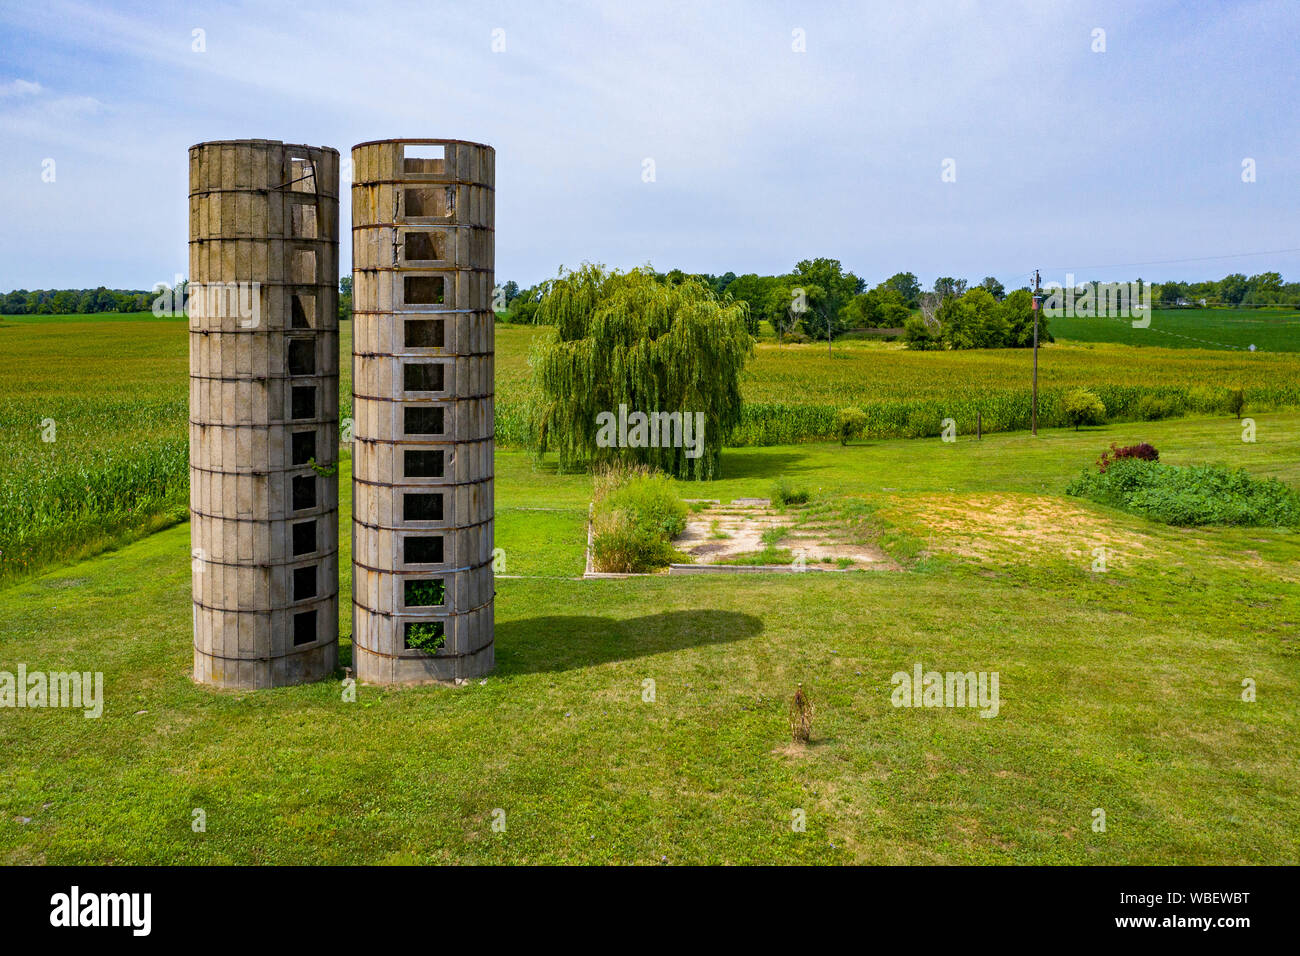 Three Oaks, Michigan - The remains of two old concrete silos on a Michigan farm. Stock Photo